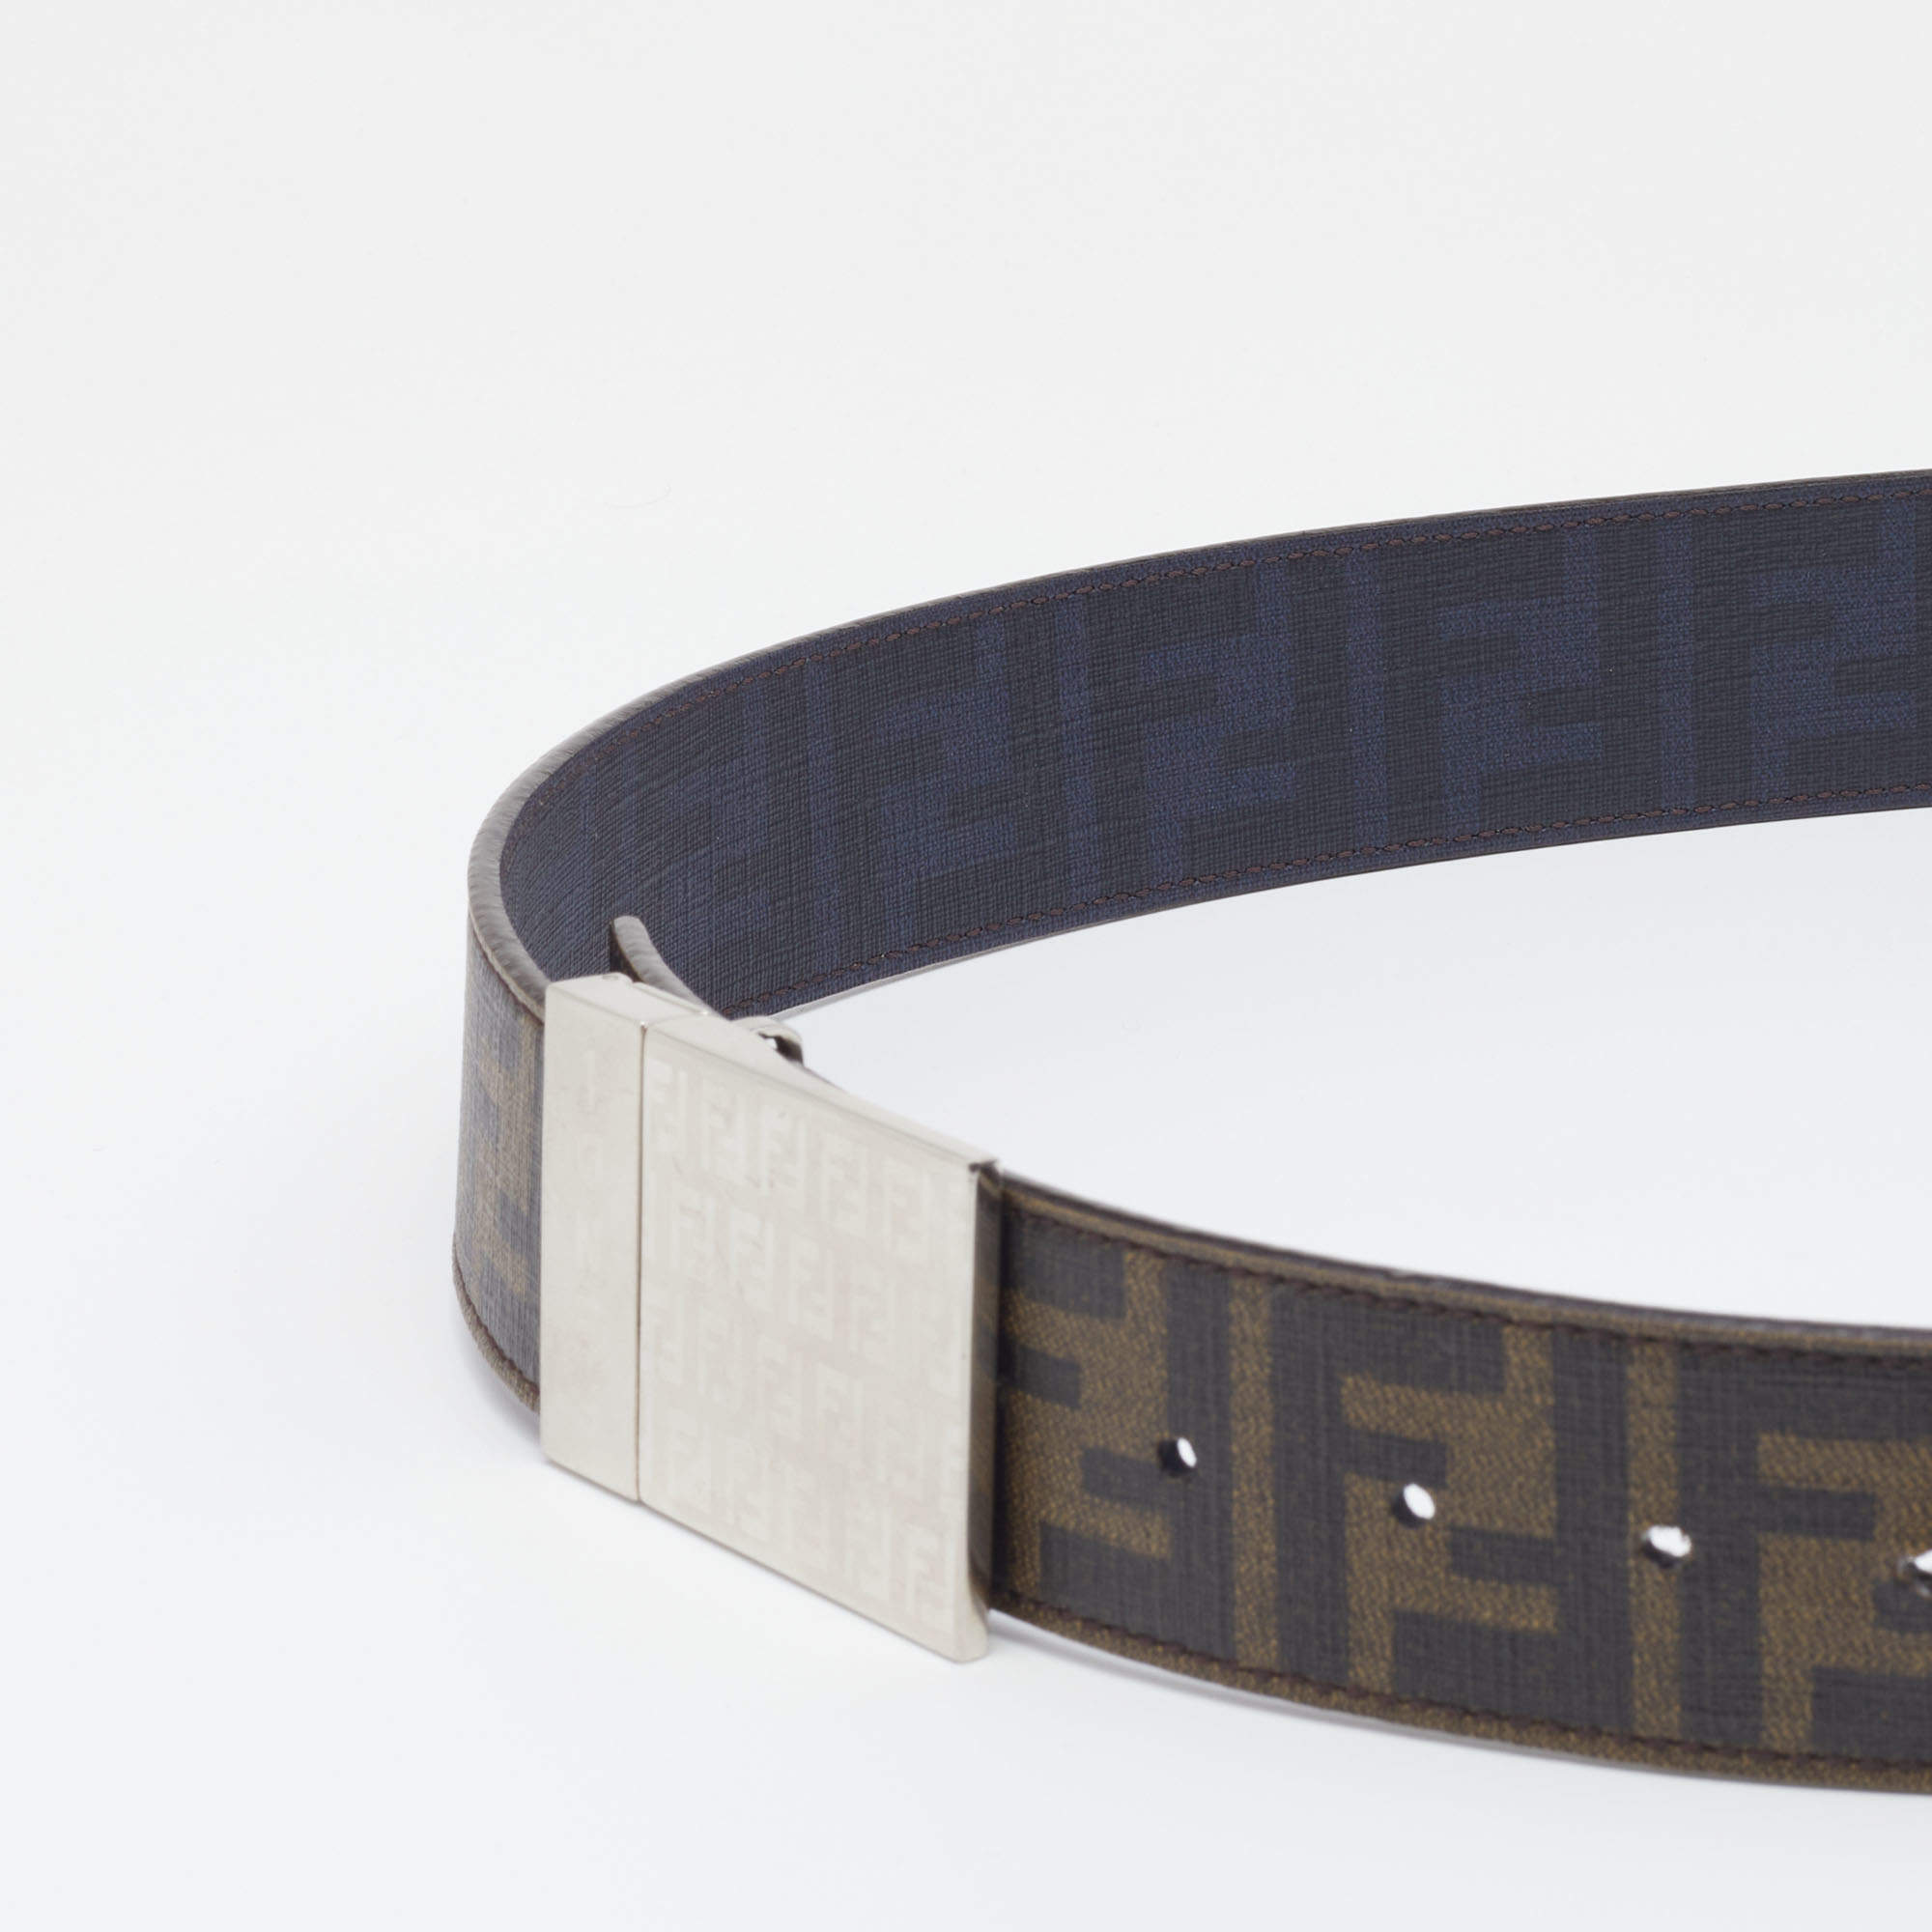 Leather belt Fendi Brown size 100 cm in Leather - 16269983